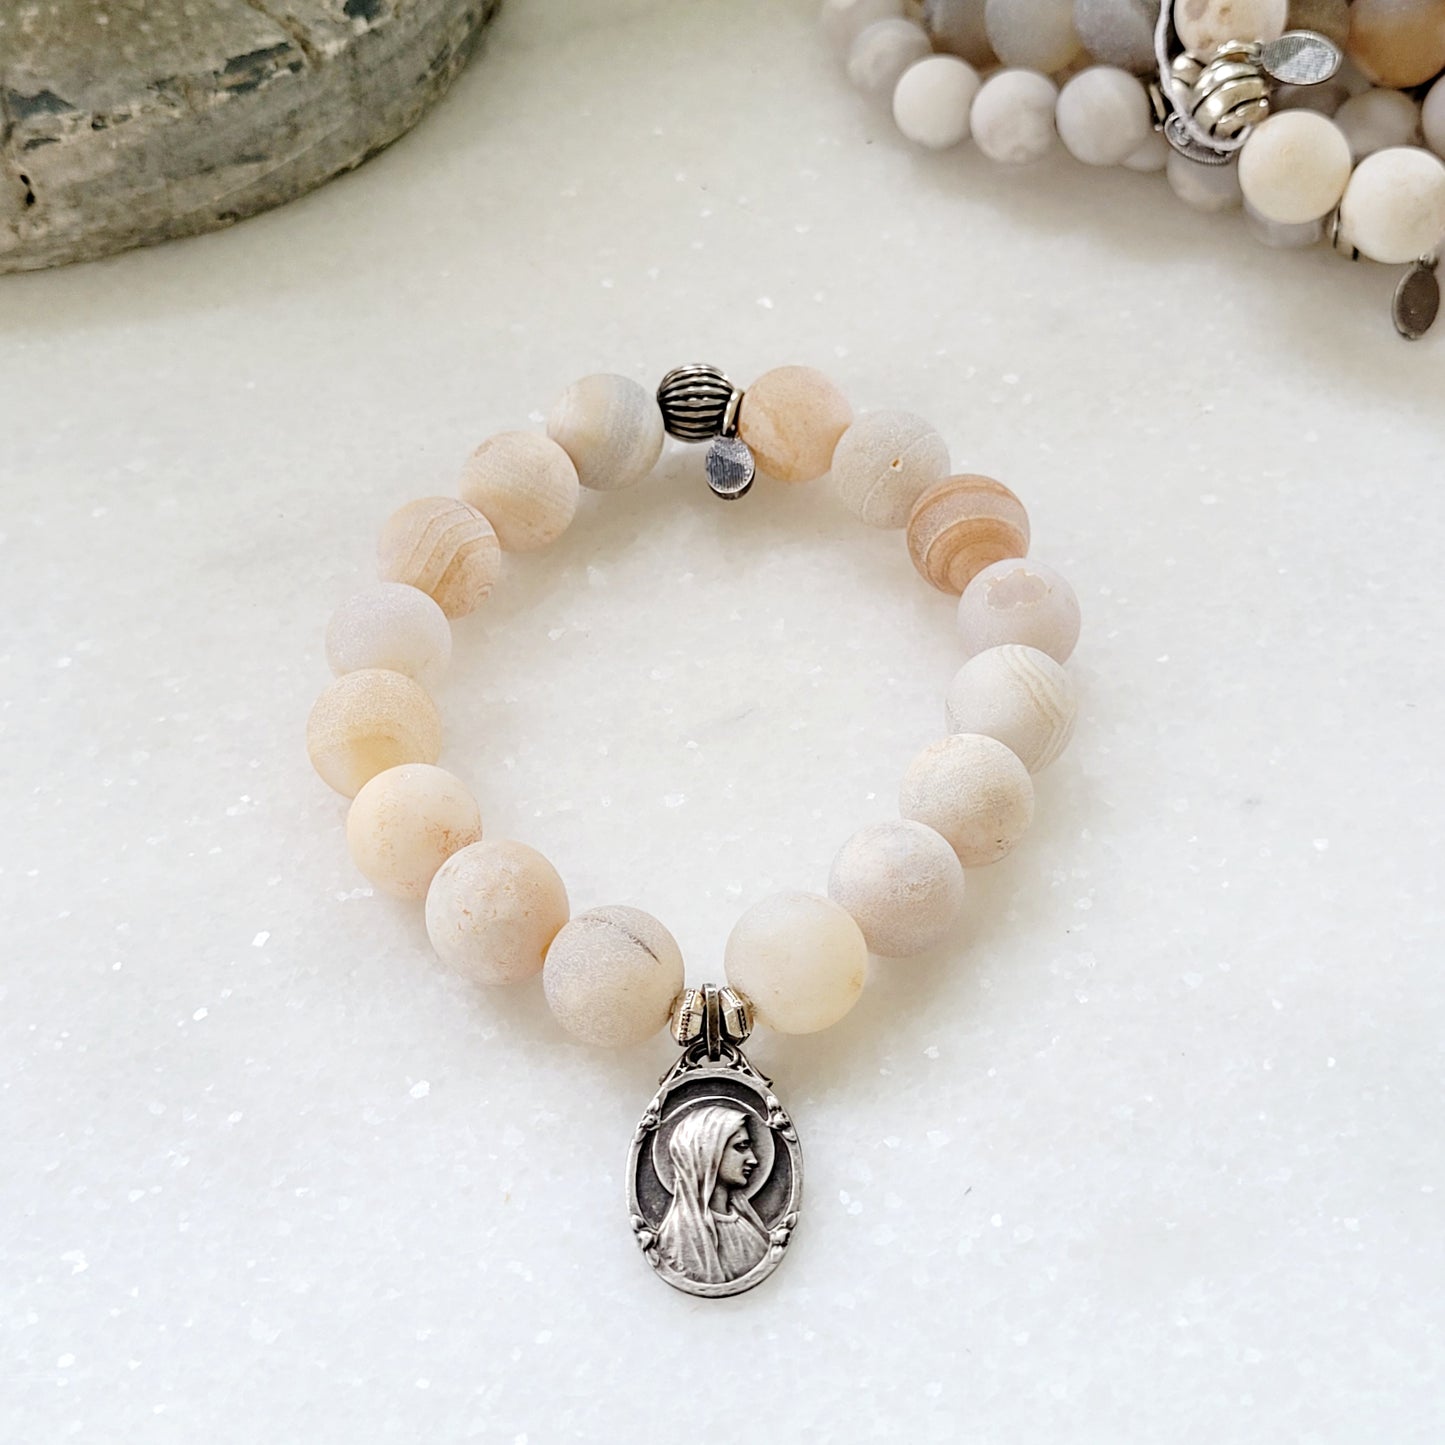 Druzy Agate 10mm Beaded Bracelet with Our Lady Virgin Mary Medal Art Nouveau Lourdes Medal - Afterlife Jewelry Designs